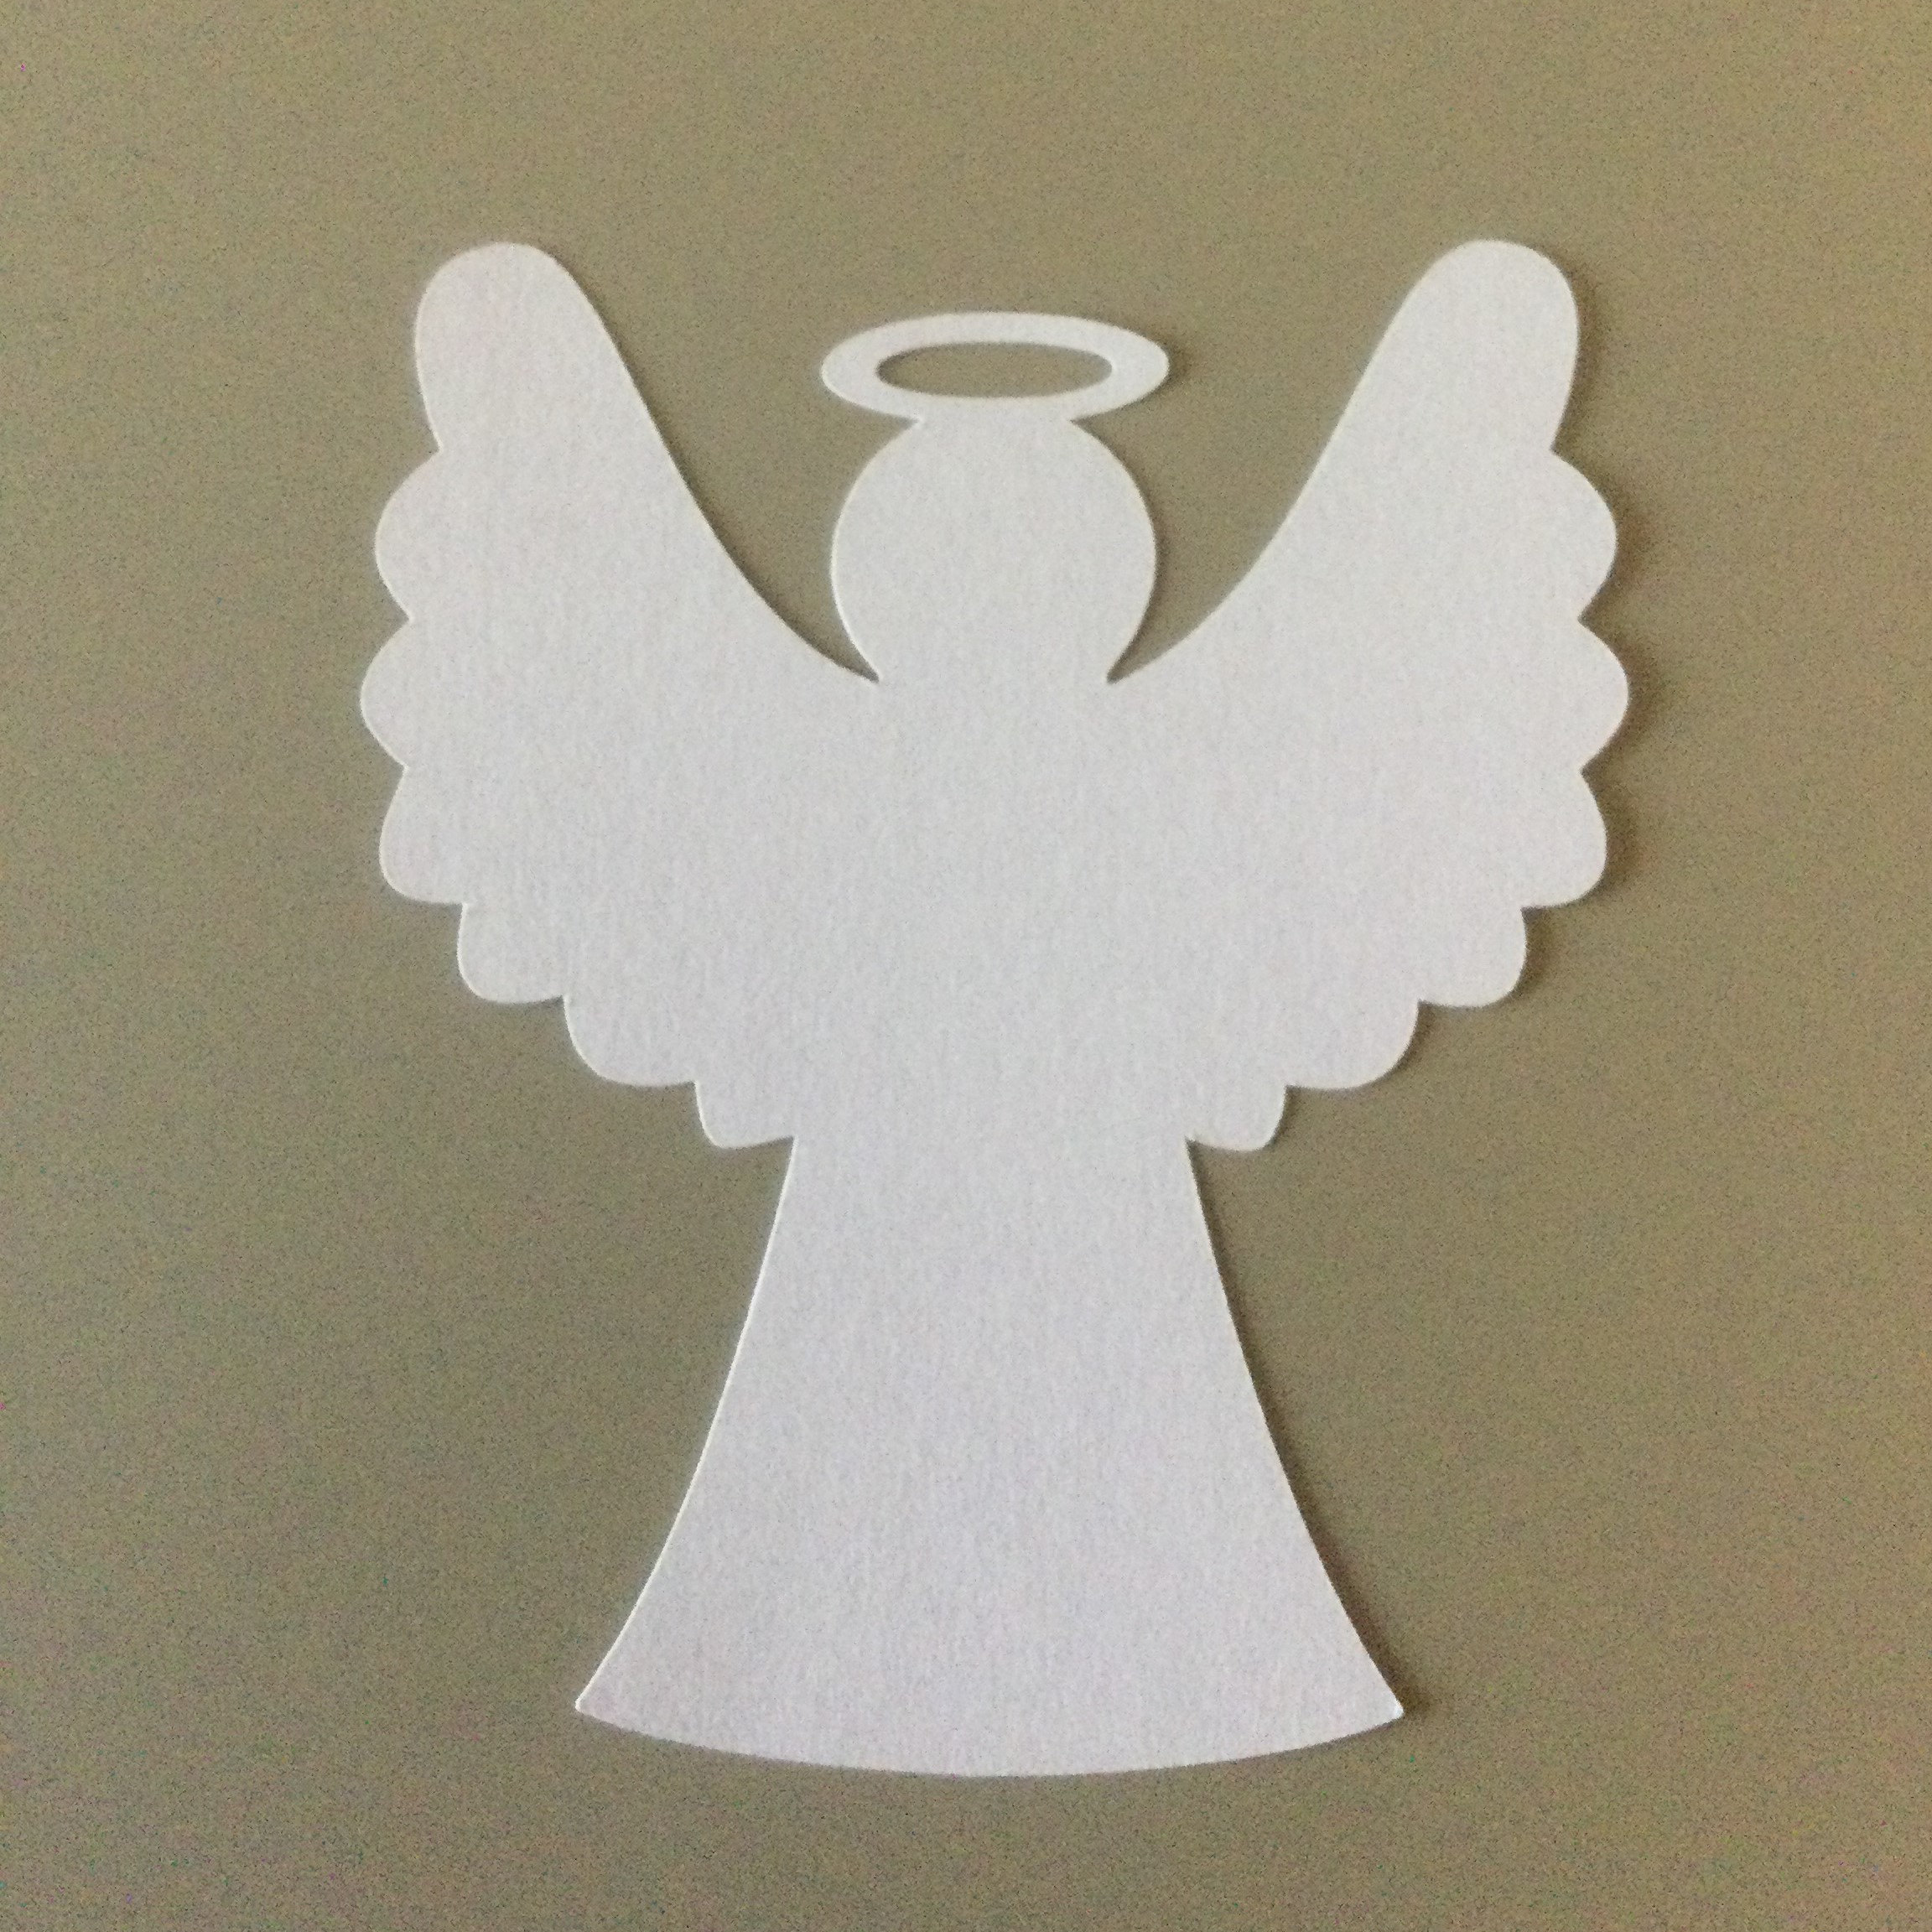 White Paper Angels Cut outs Die cuts Christmas Holiday Crafts Set of 30